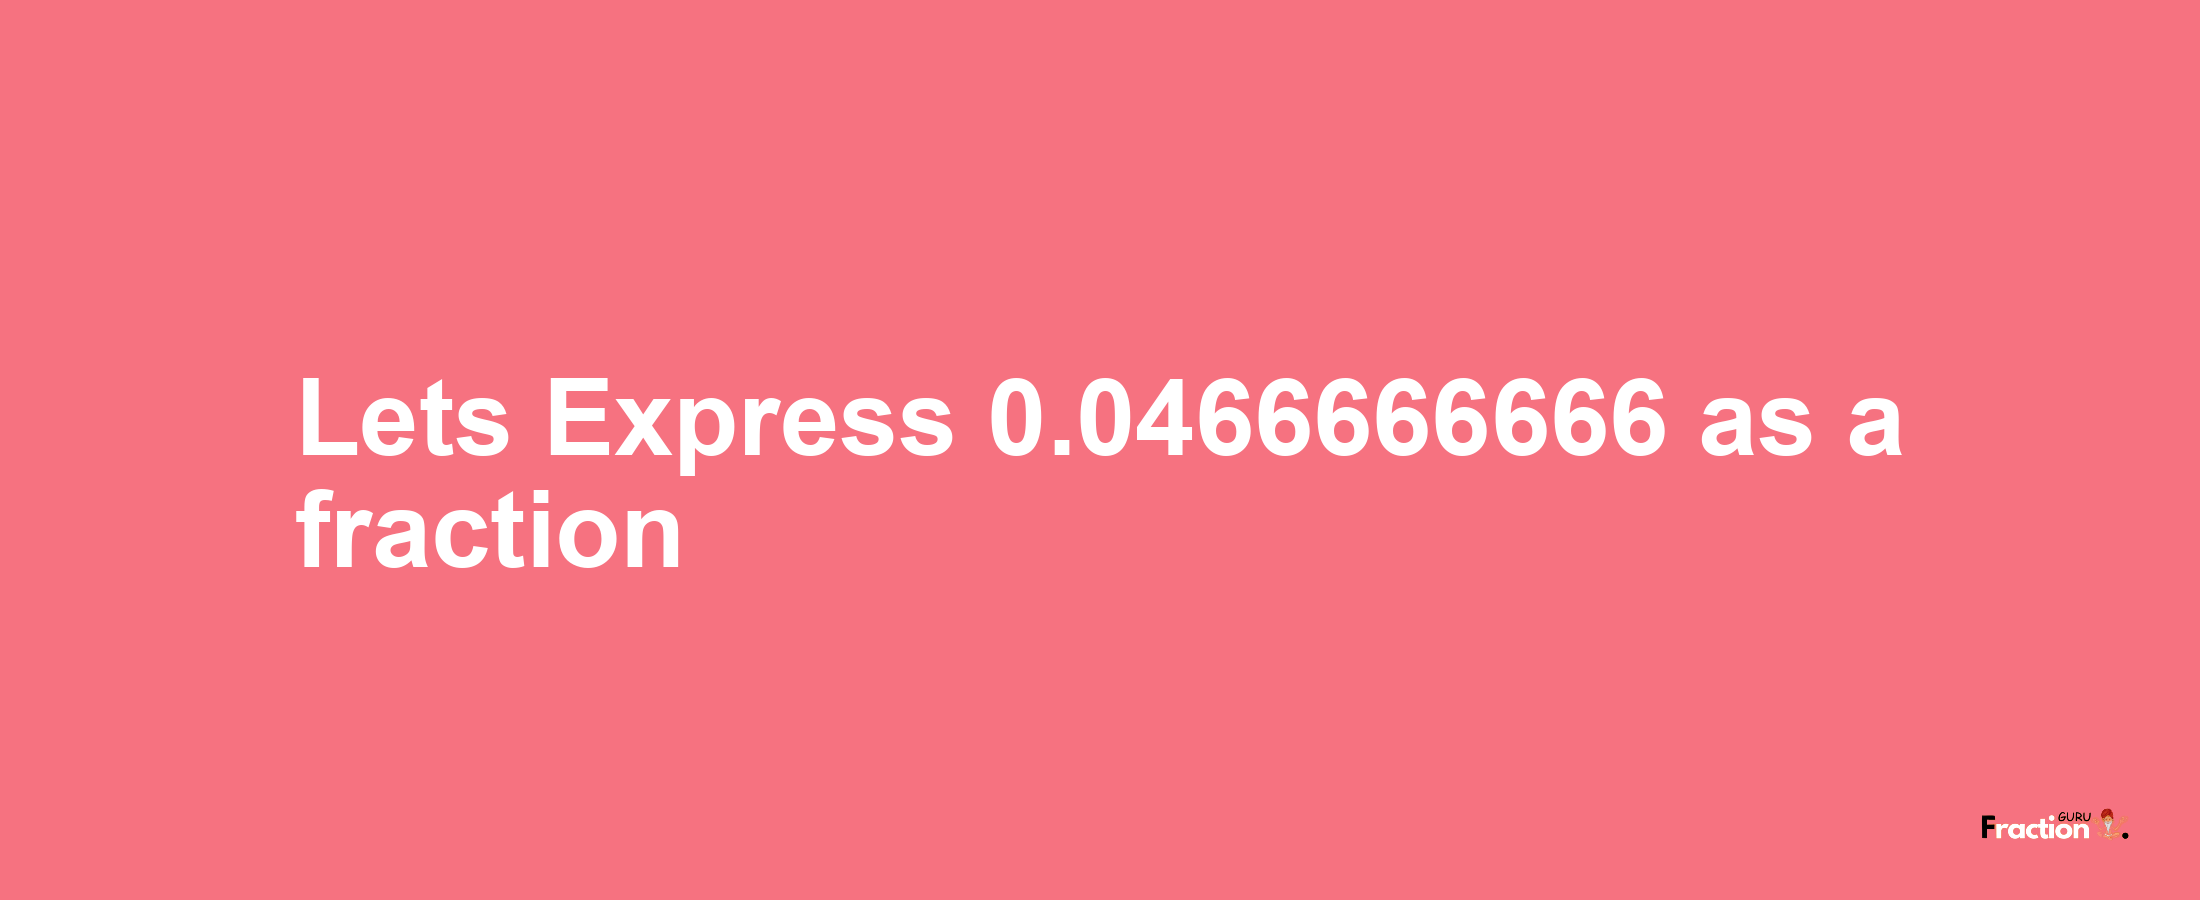 Lets Express 0.0466666666 as afraction